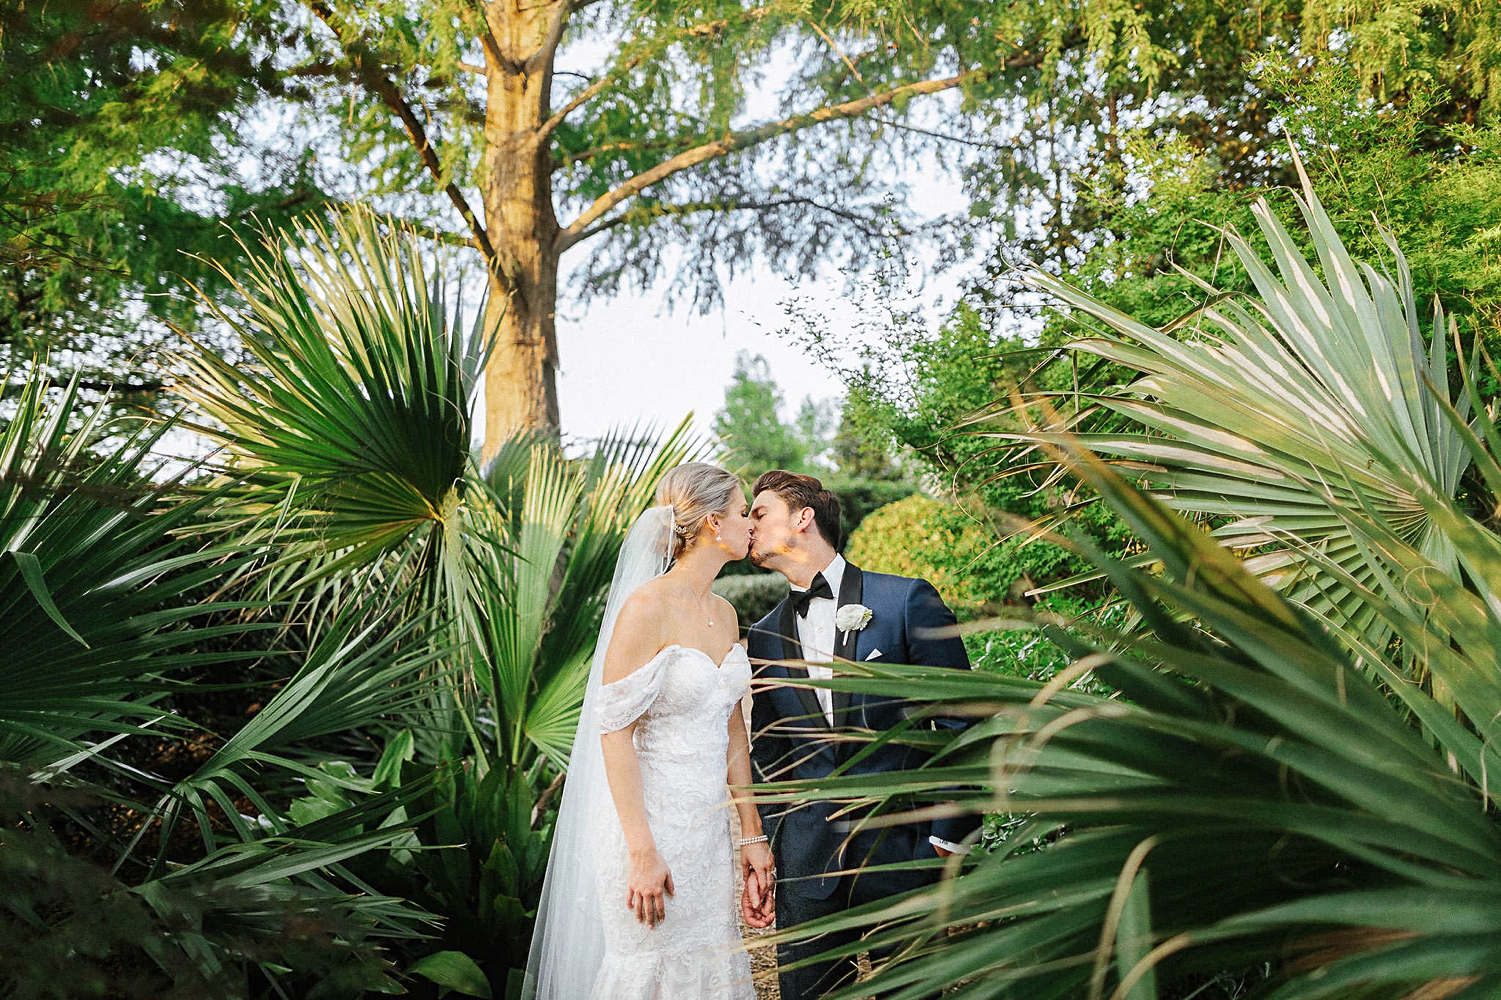 Groom in blue suit kissing bride in white dress and veil standing in green palms destination wedding locations